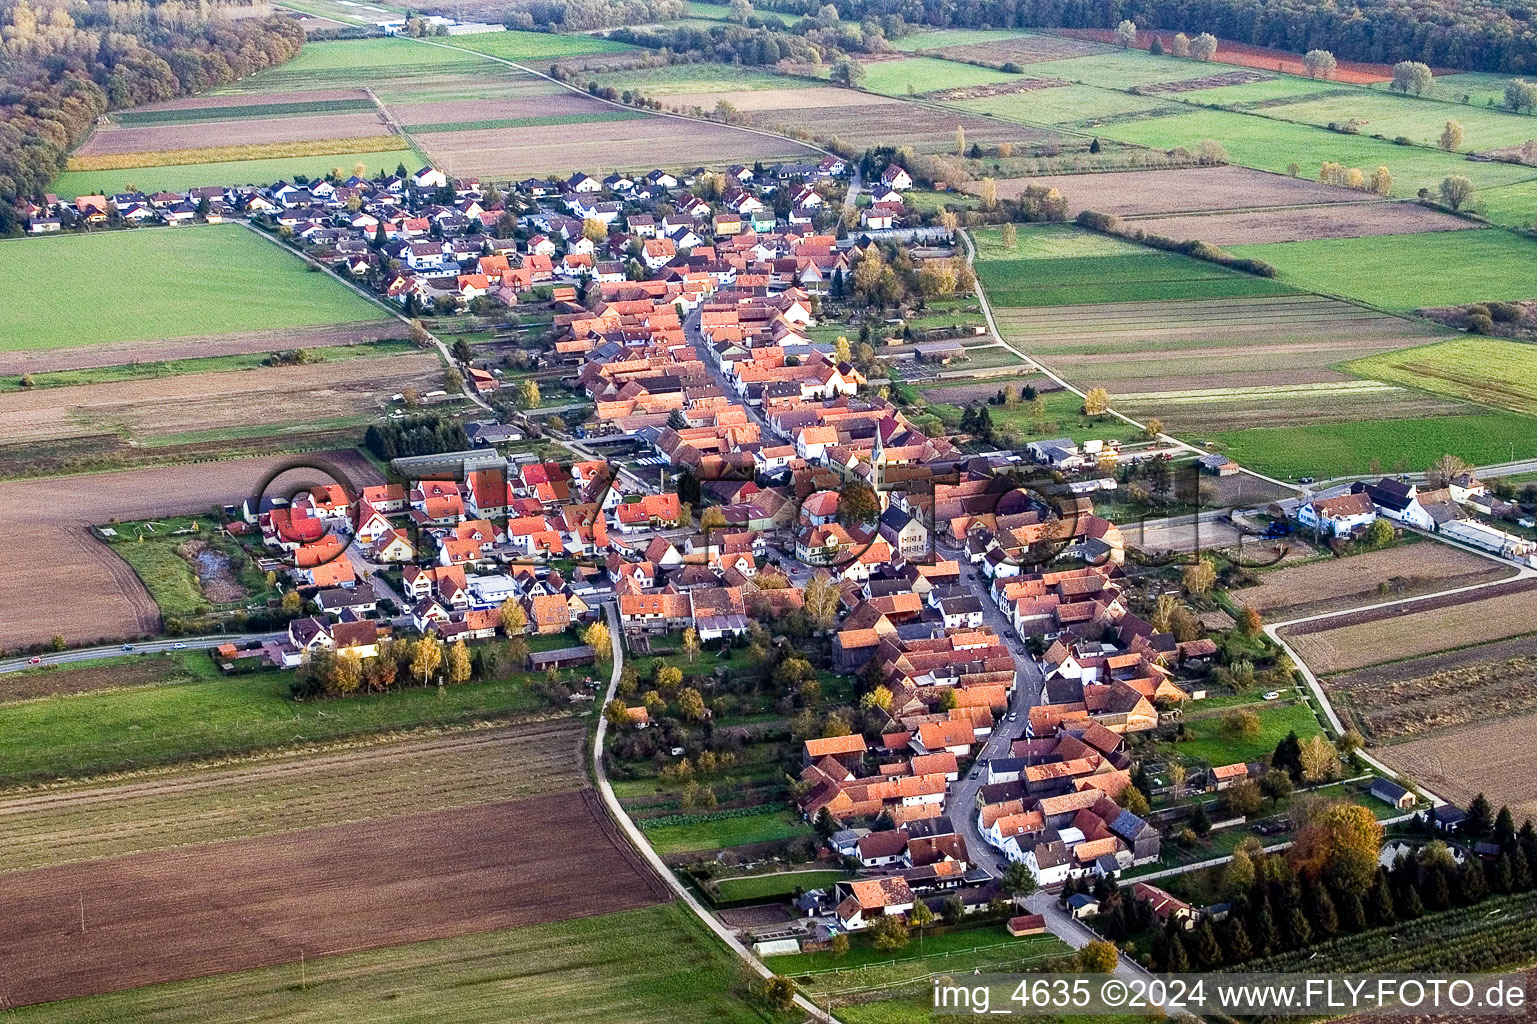 Village - view on the edge of agricultural fields and farmland in the district Gewerbegebiet Horst in Erlenbach bei Kandel in the state Rhineland-Palatinate from above